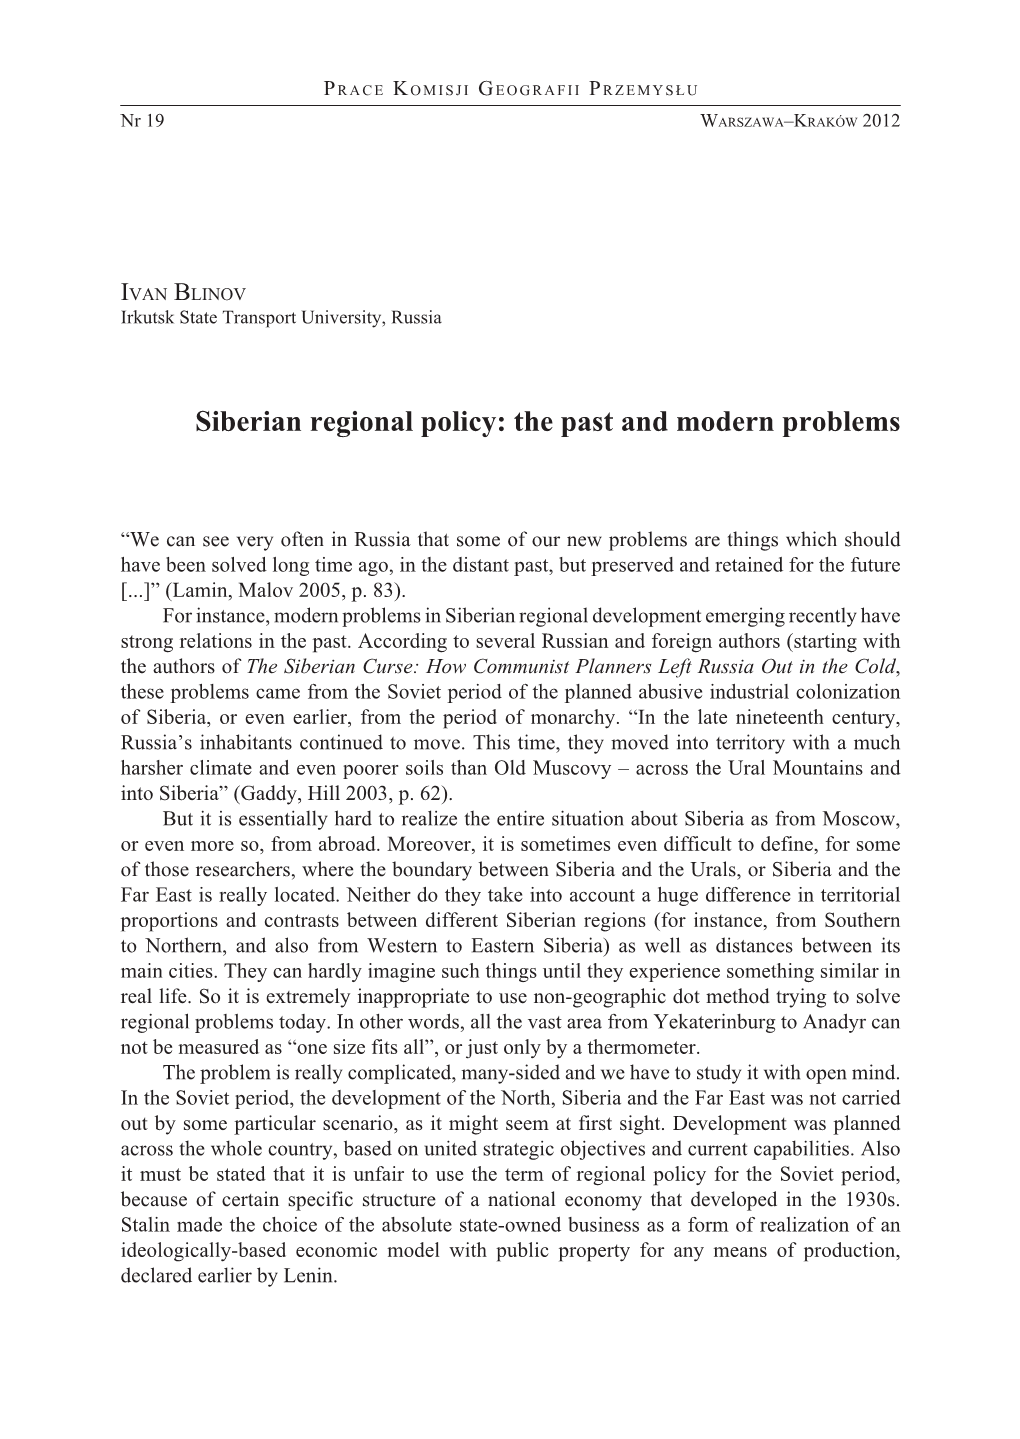 Siberian Regional Policy: the Past and Modern Problems